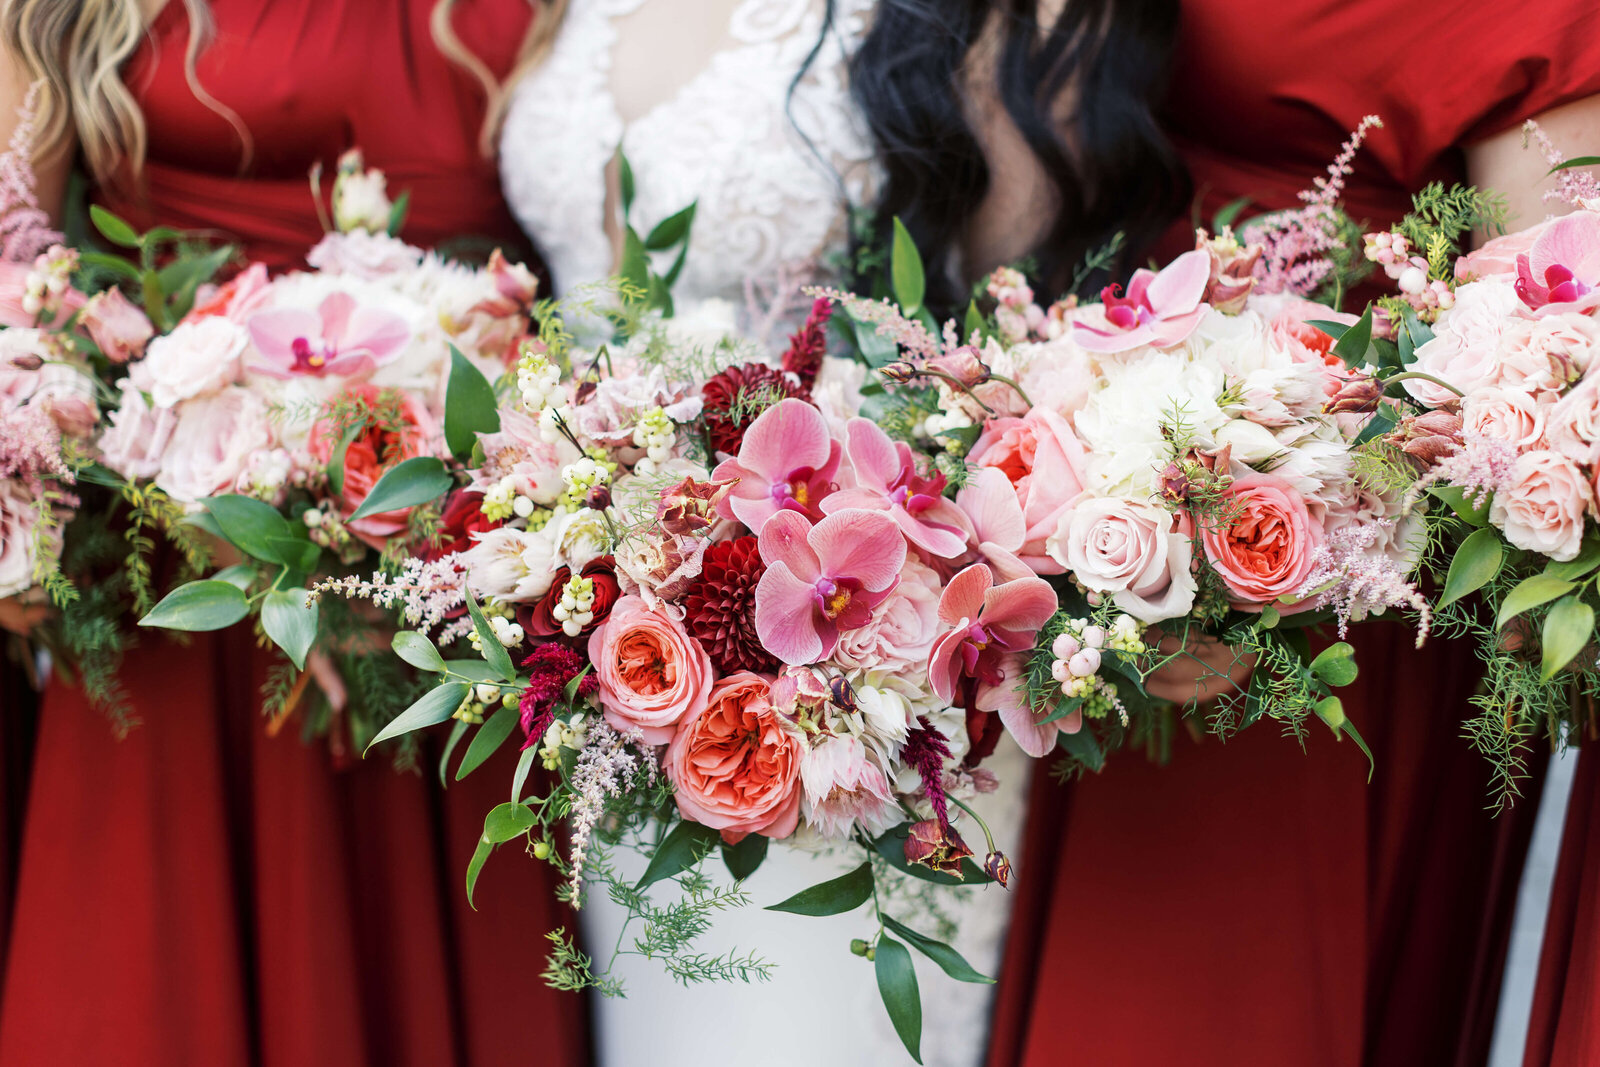 Lucious and vibrant wedding bouquets created by Rosaspina Florals.